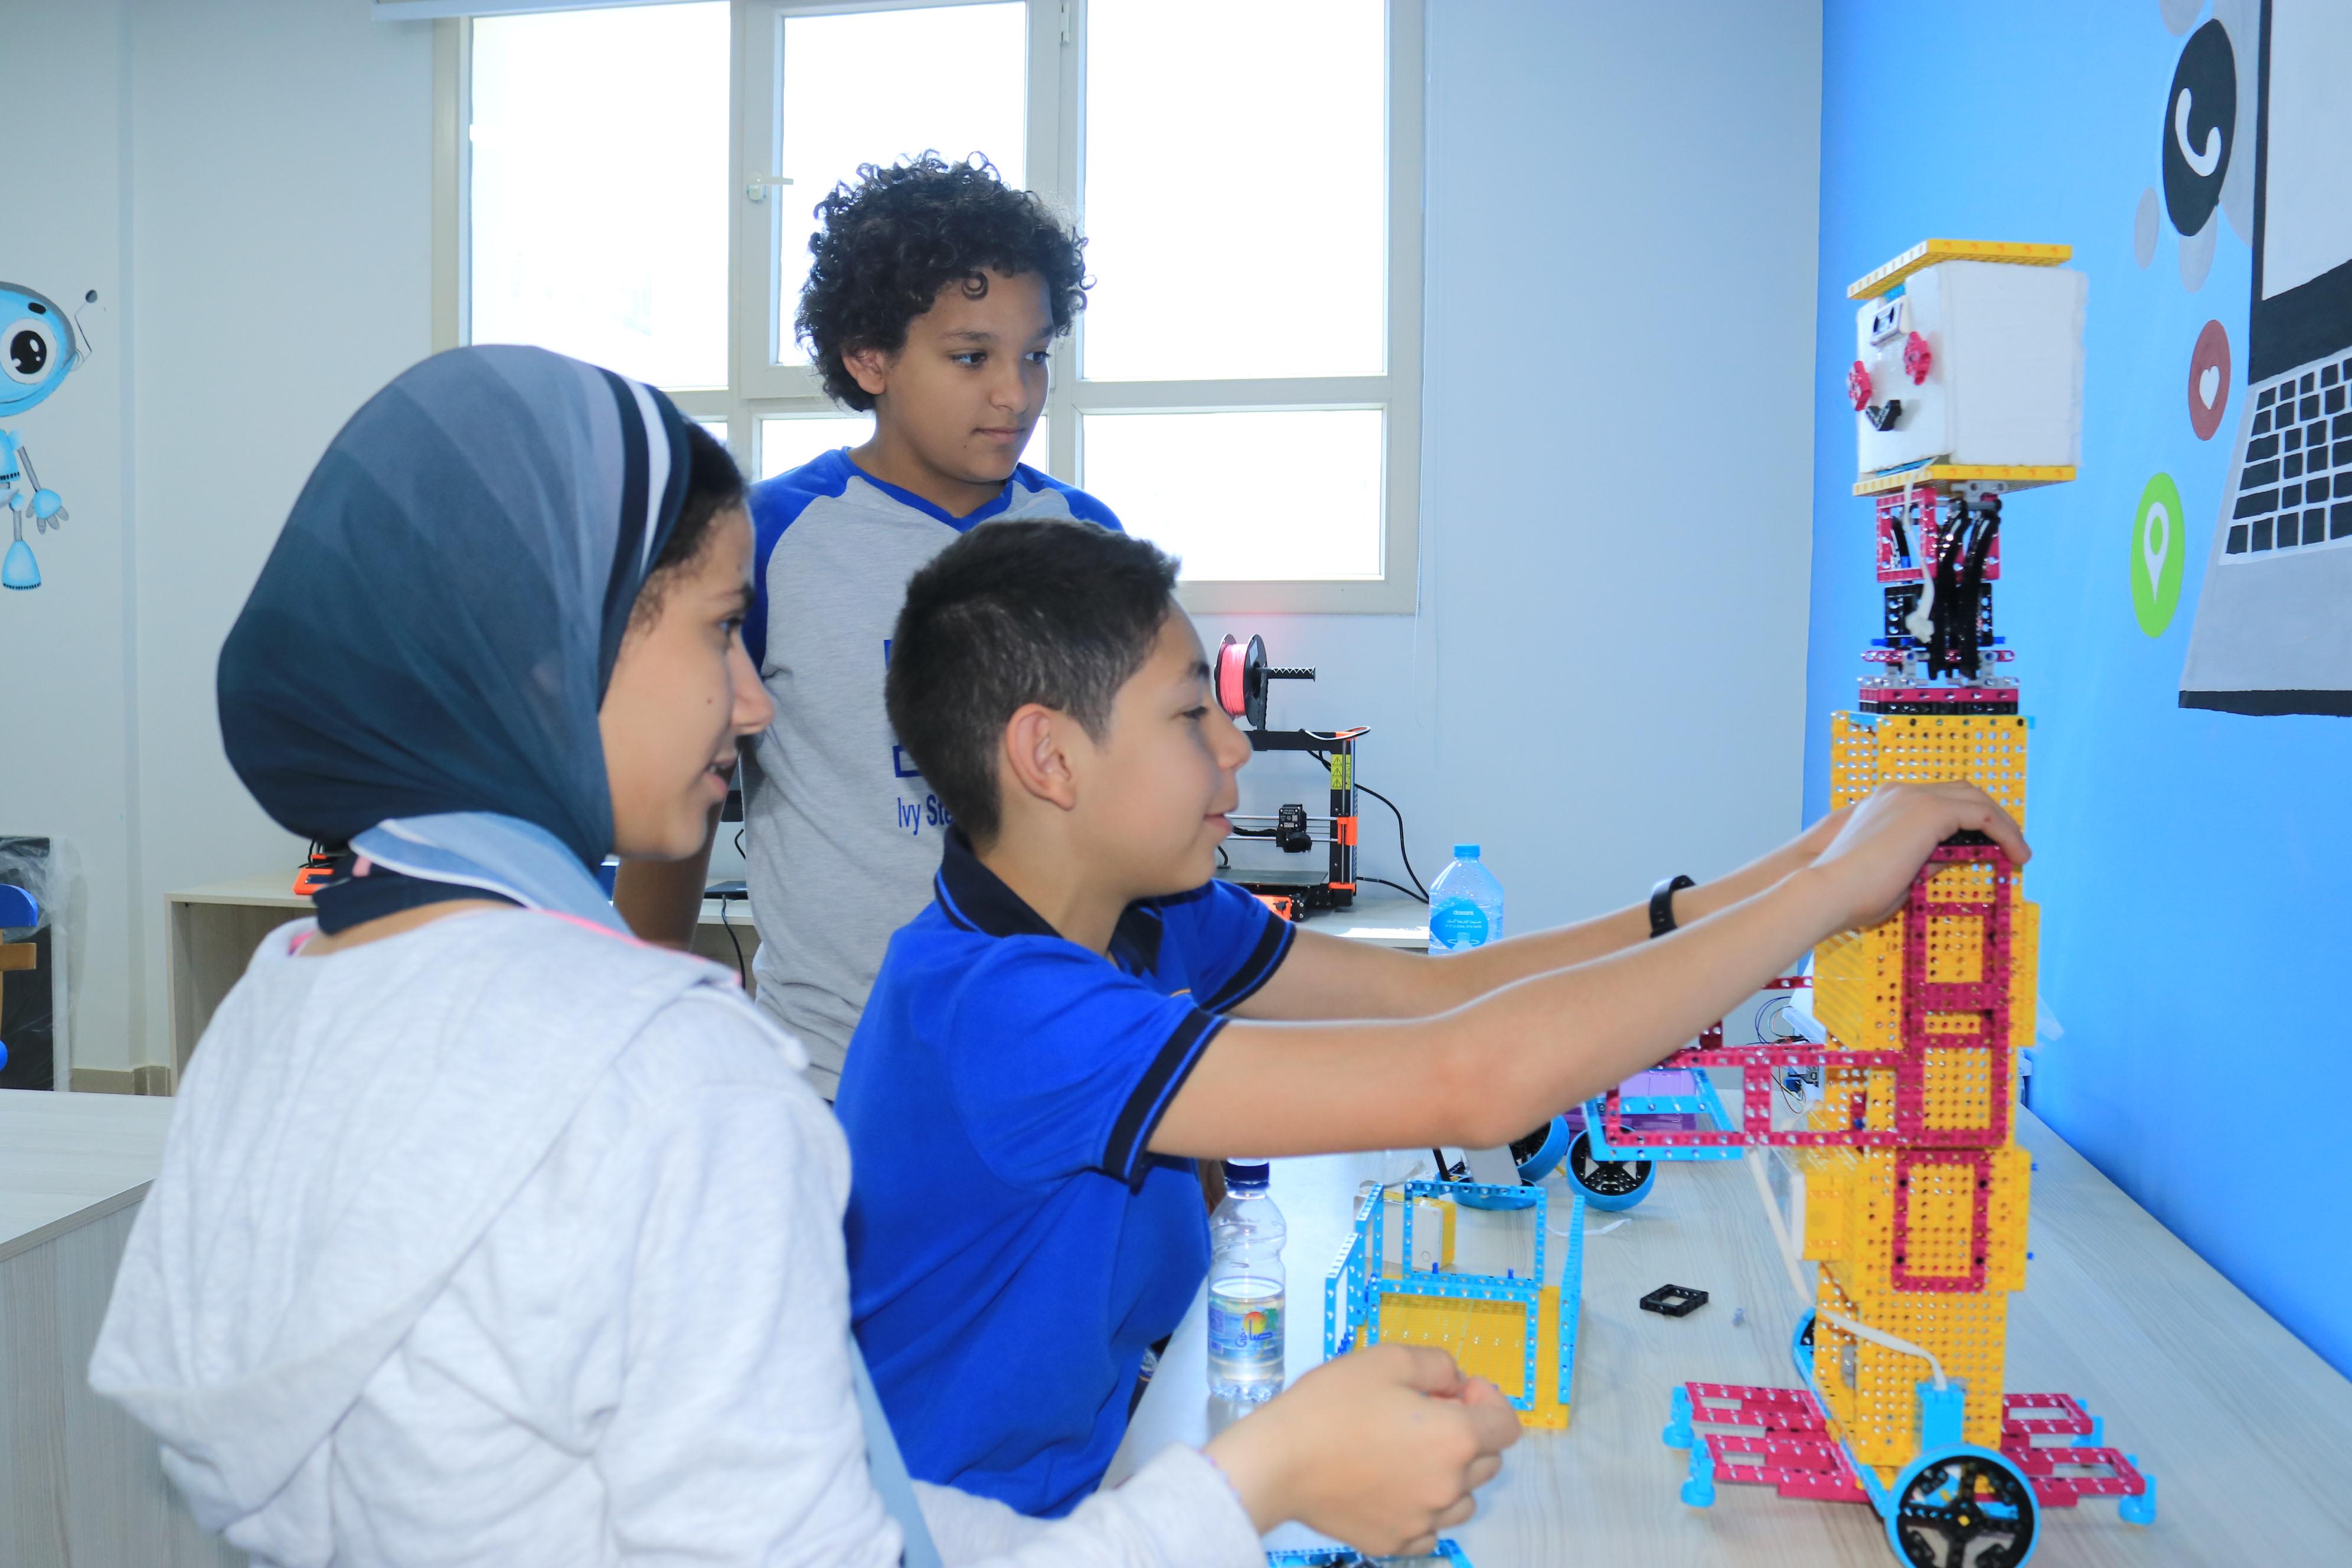 Three young students from IVY STEM International School actively participating in a STEM activity involving a robotic model.